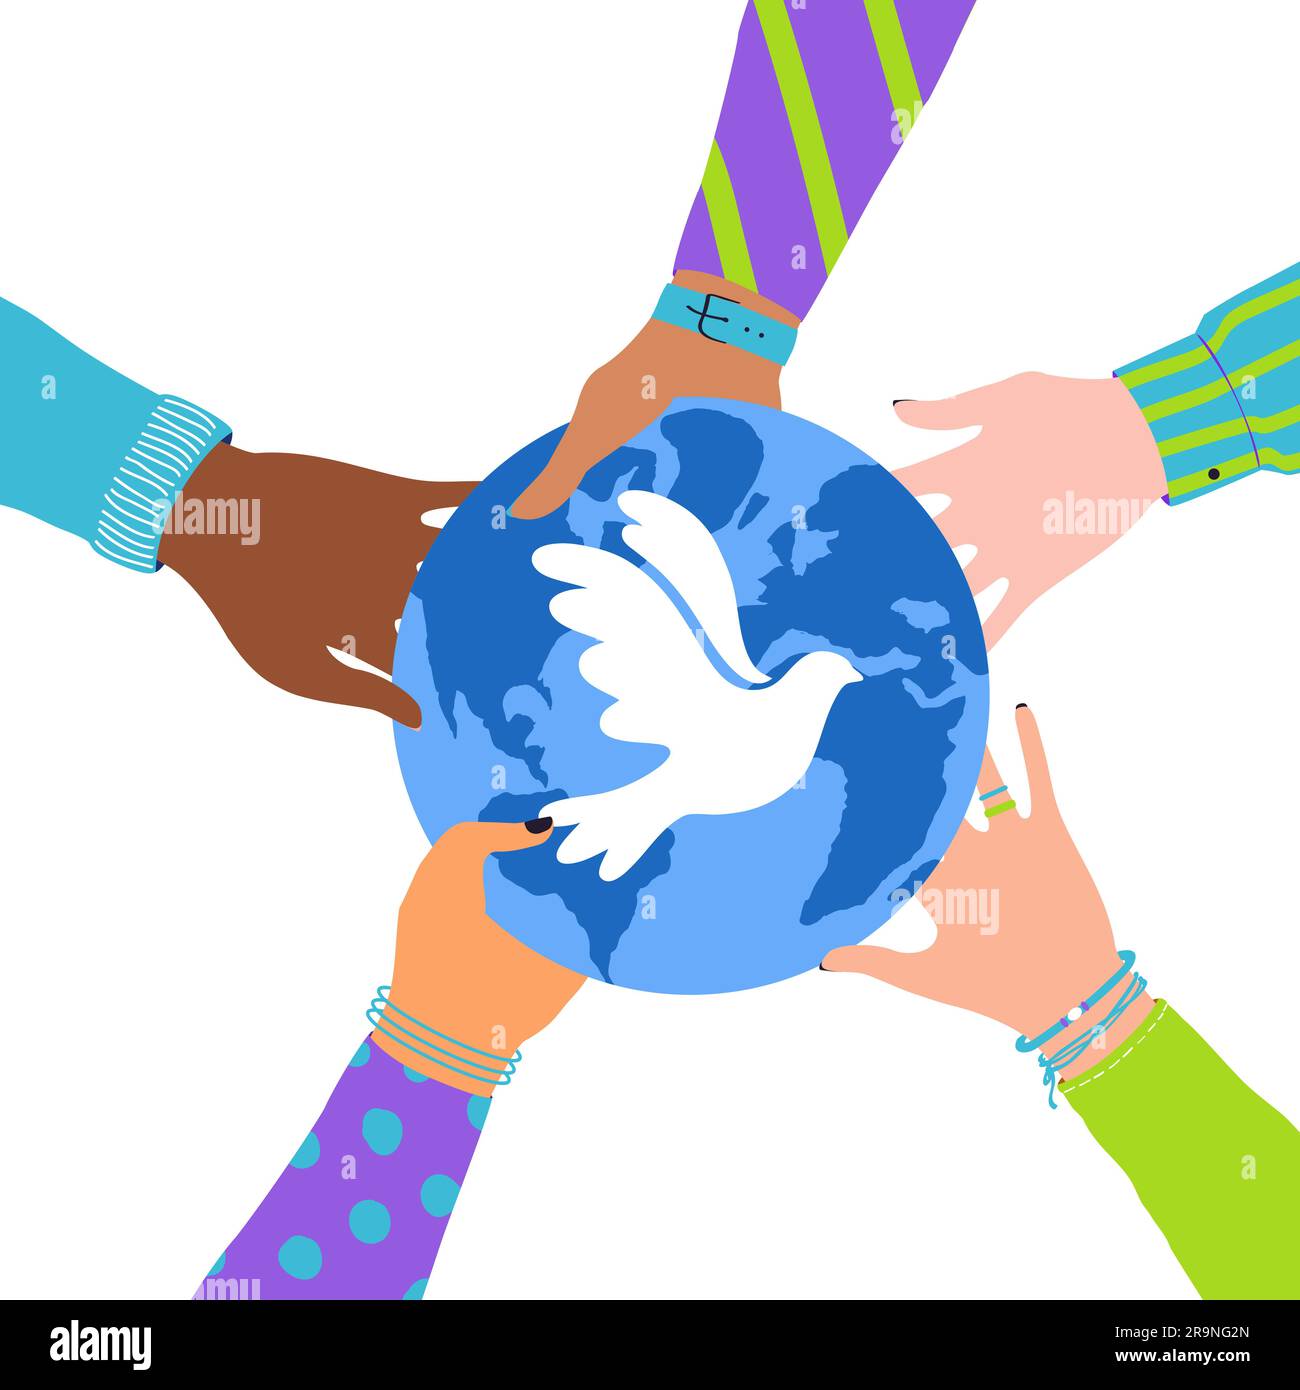 Vector illustration of human hands holding Earth globe with flying bird dove as a symbol of peace isolated on white background. International Peace Da Stock Vector